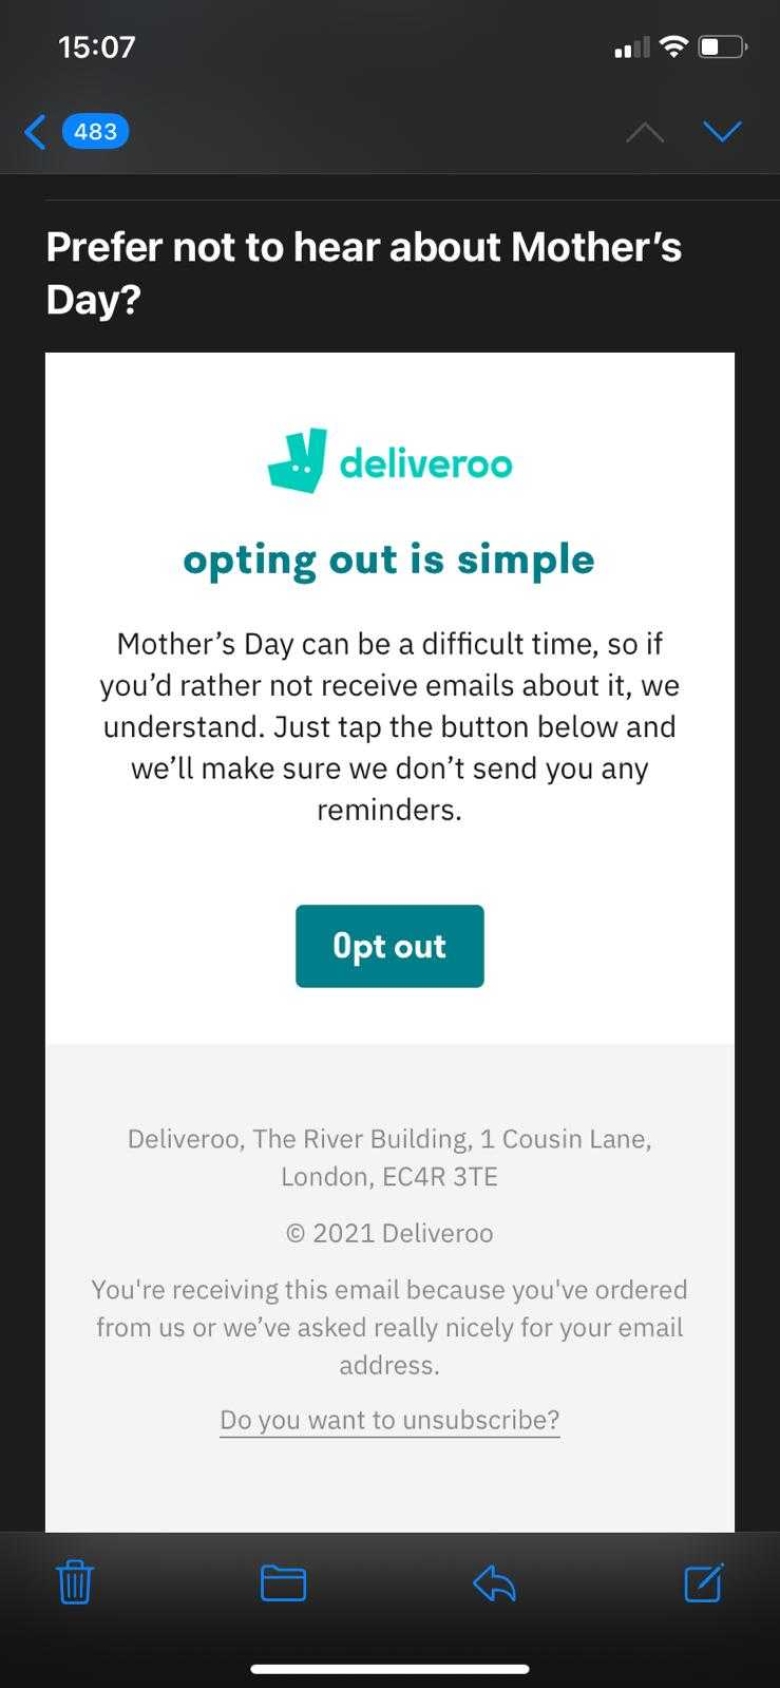 Deliveroo lets you opt out of Mother's Day in this sensitive message